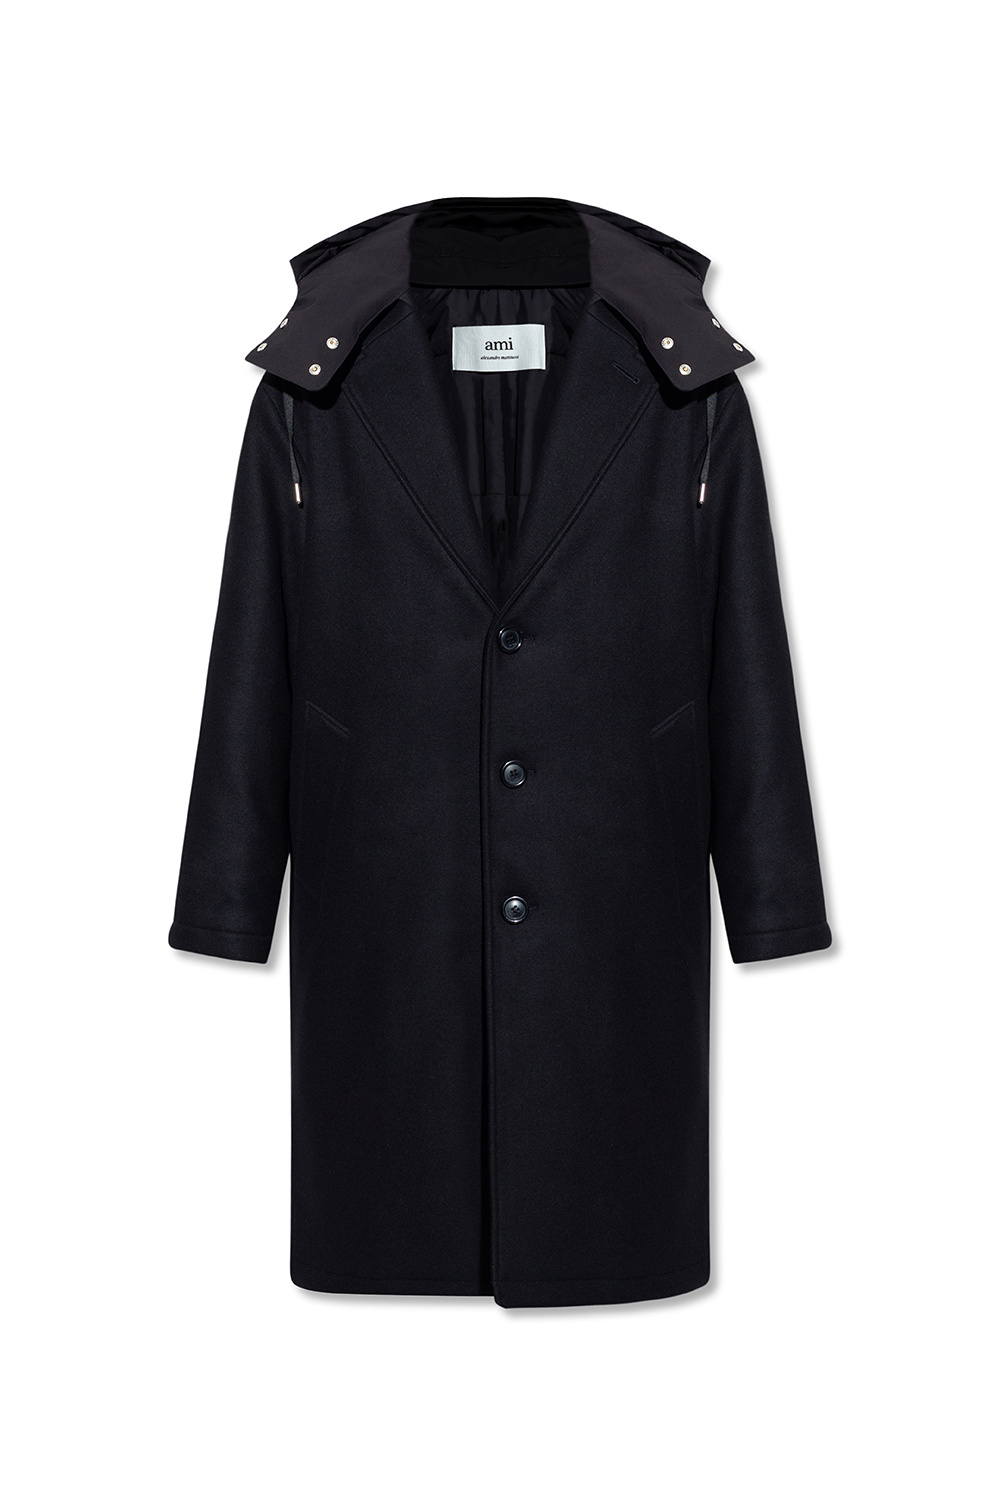 Download the latest version of the app Wool coat